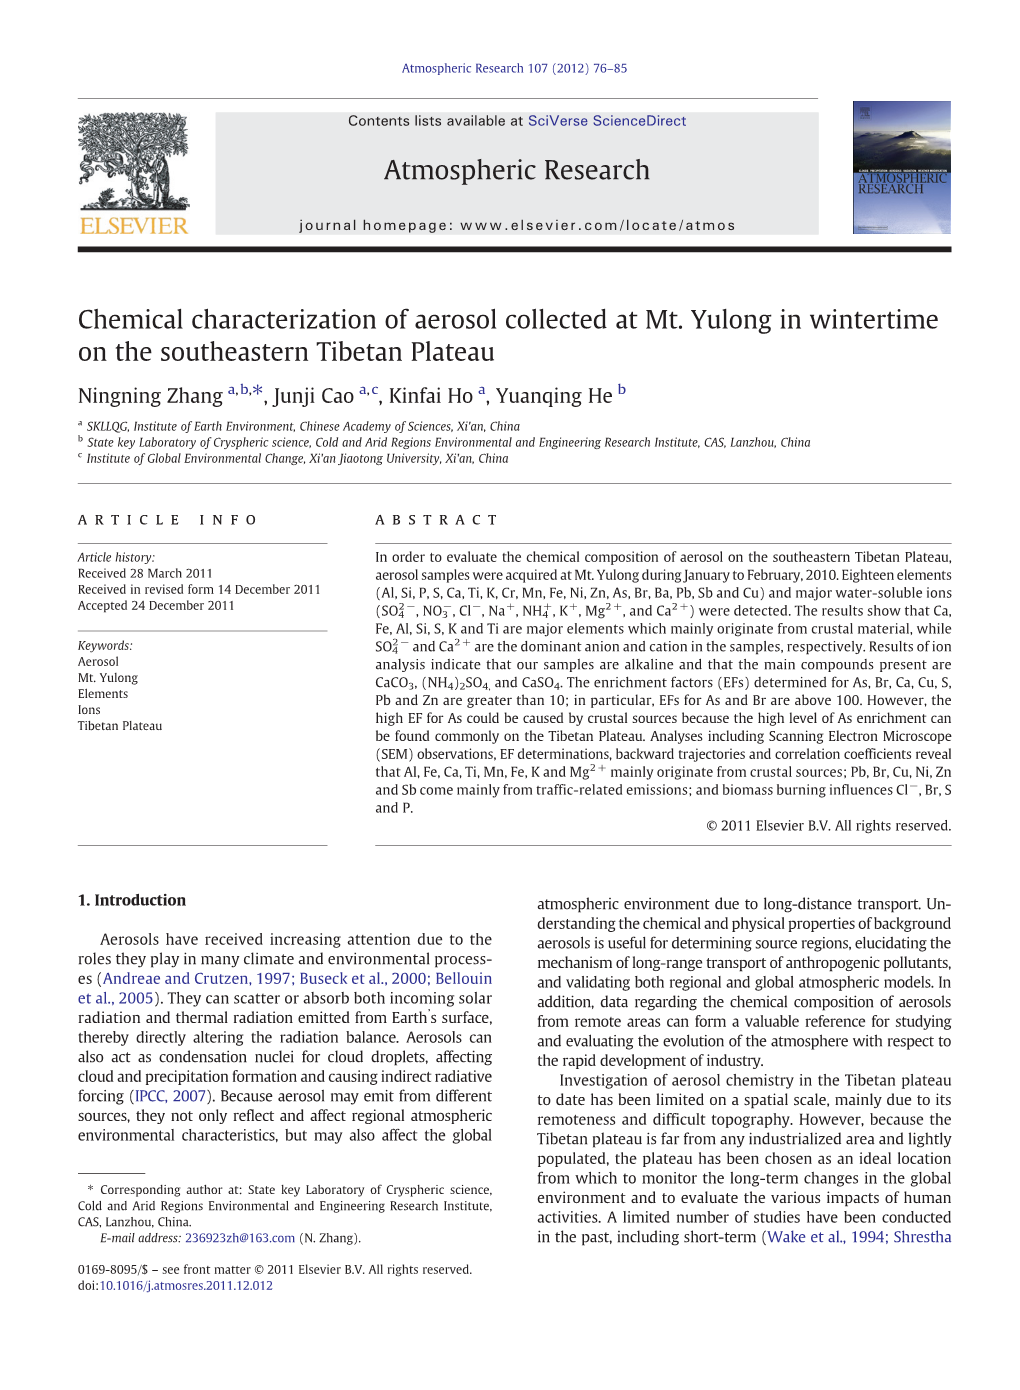 Chemical Characterization of Aerosol Collected at Mt. Yulong in Wintertime on the Southeastern Tibetan Plateau